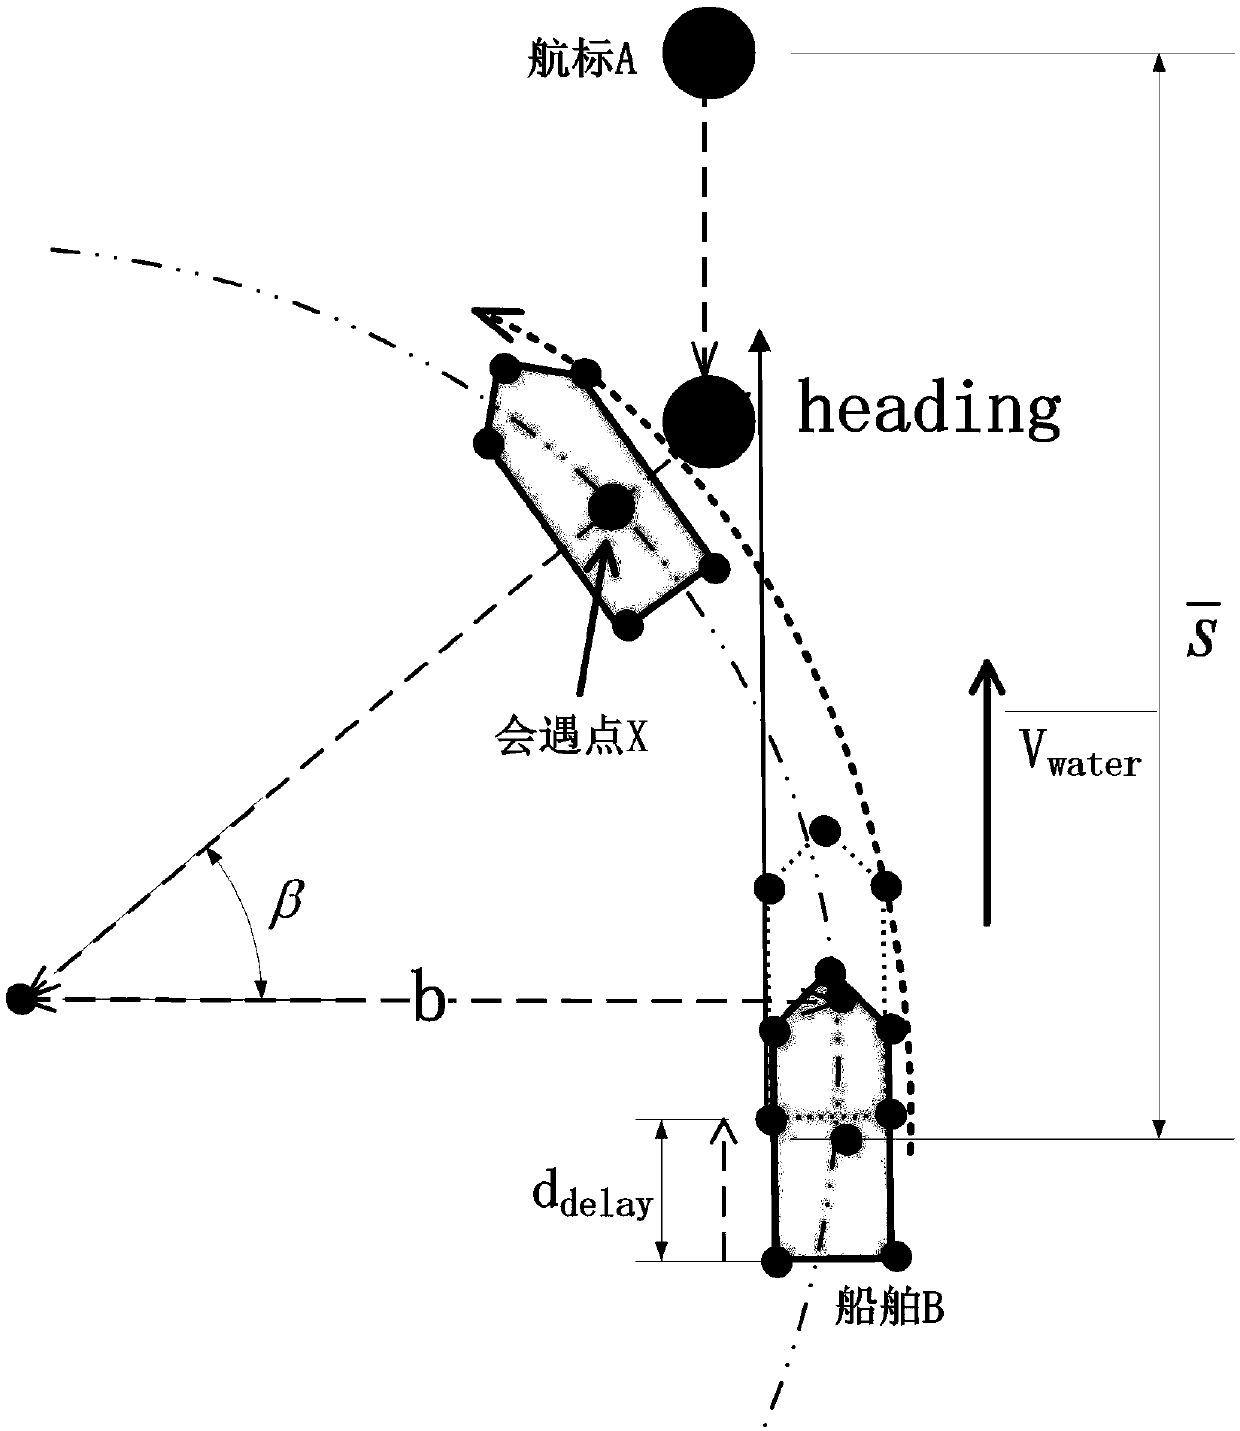 Ship-navigation buoy collision risk degree estimation method based on automatic identification system (AIS)